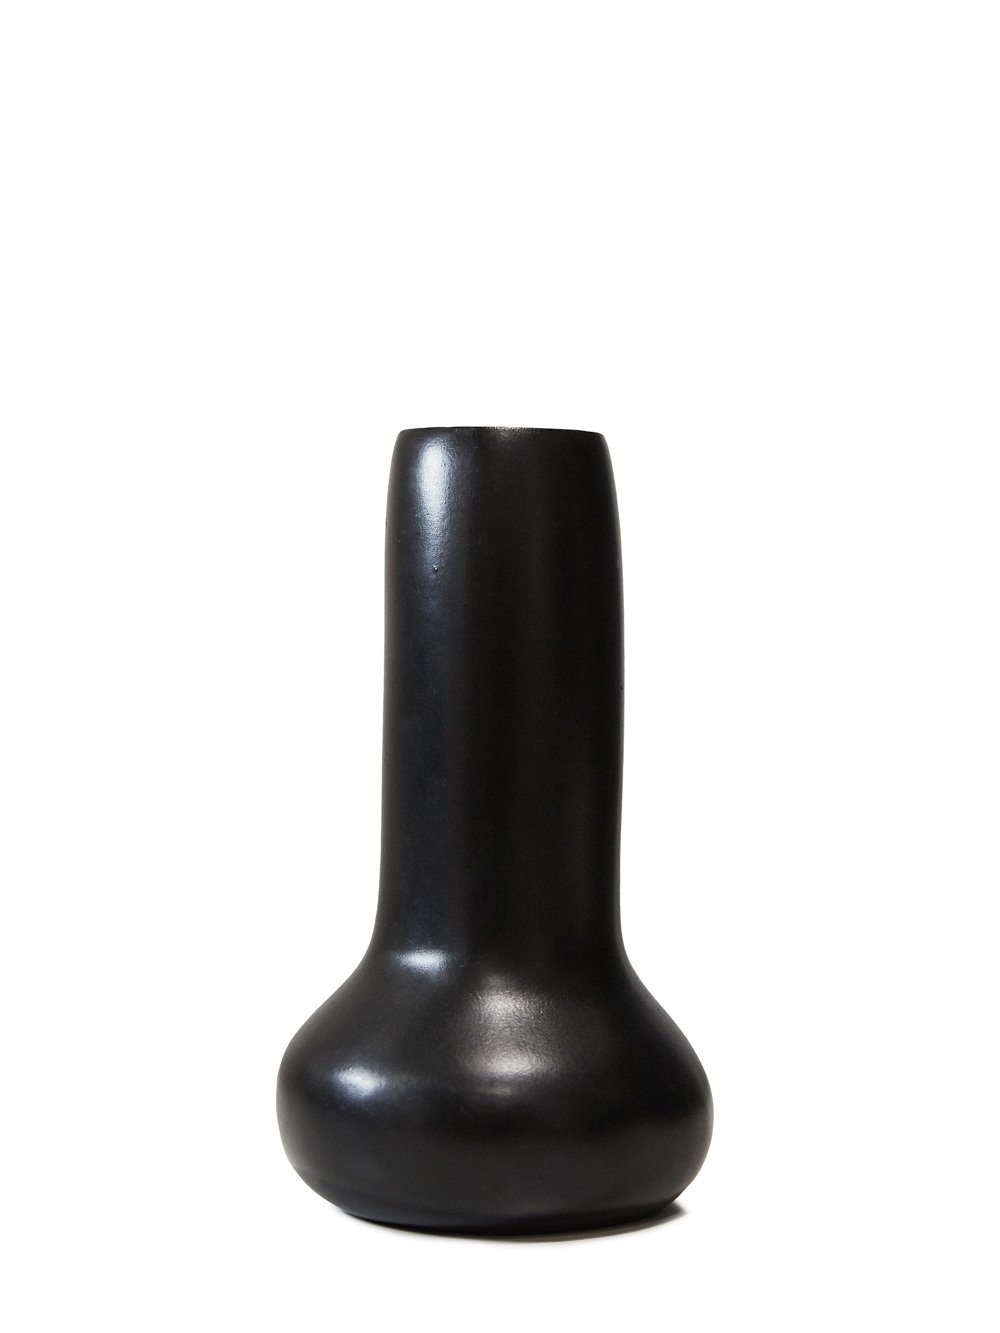 RICK OWENS BUD VASE IN BLACK BRONZE FEATURES A OVAL SHAPE BOTTOM AND A MIDI-LENGTH NECK.